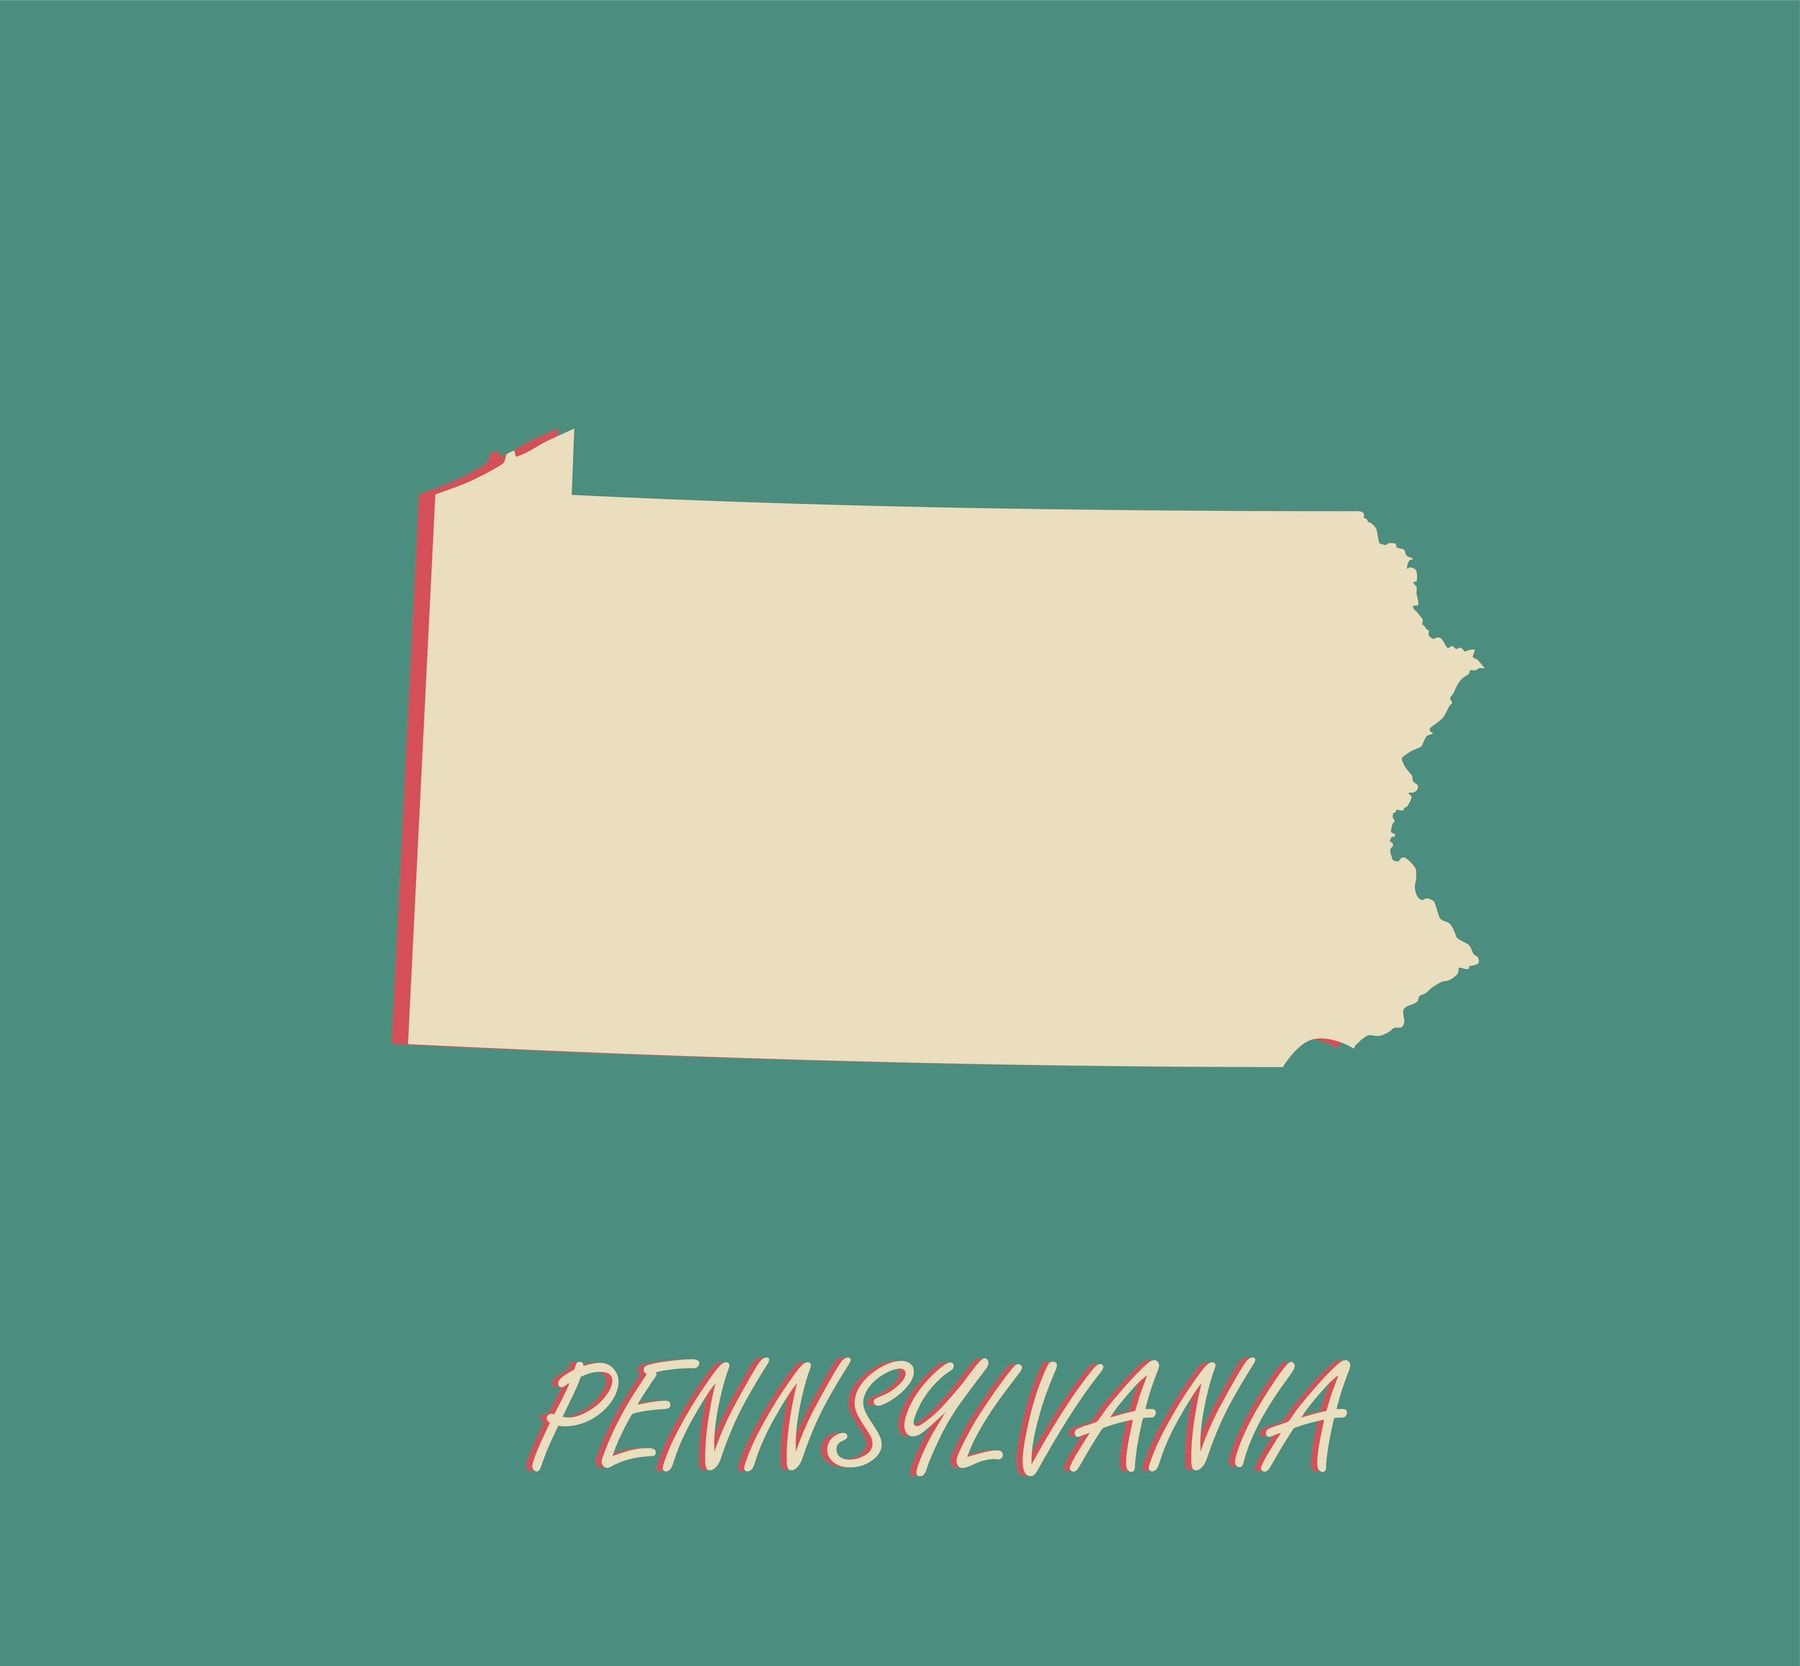 Pennsylvania household employment tax and labor law guide